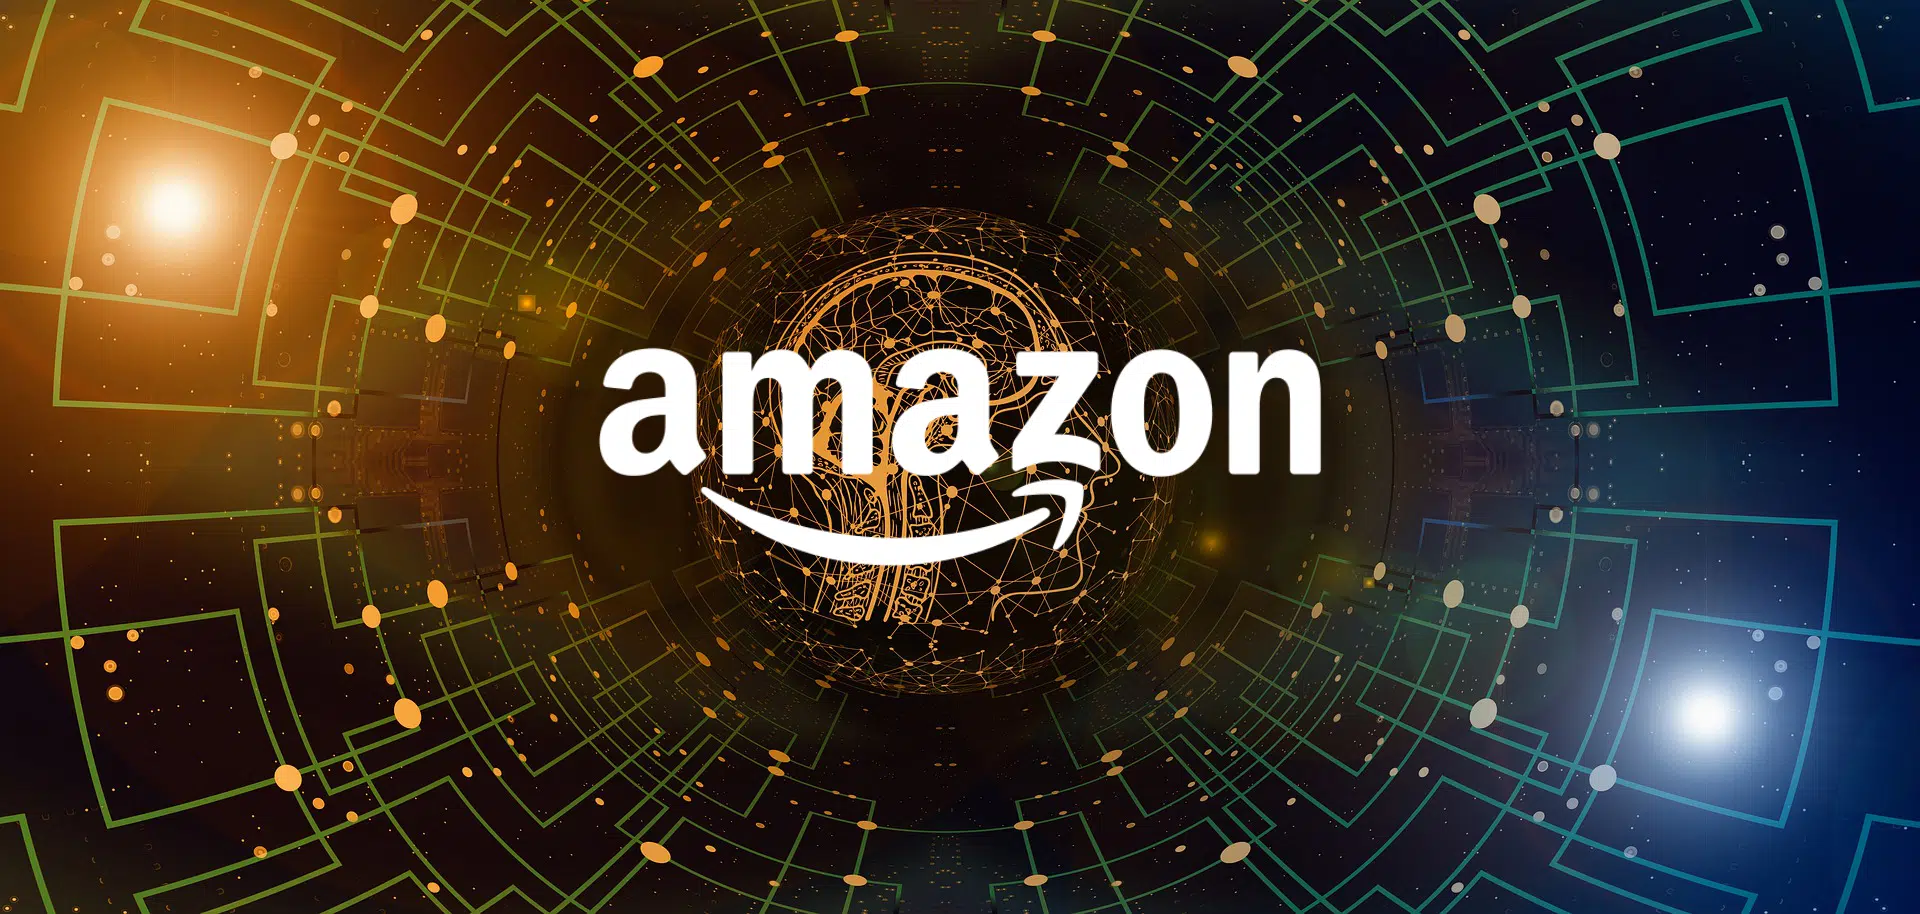 Amazon MiniTV Expands Content Offering in India with New Regional Shows and Dubbed Titles